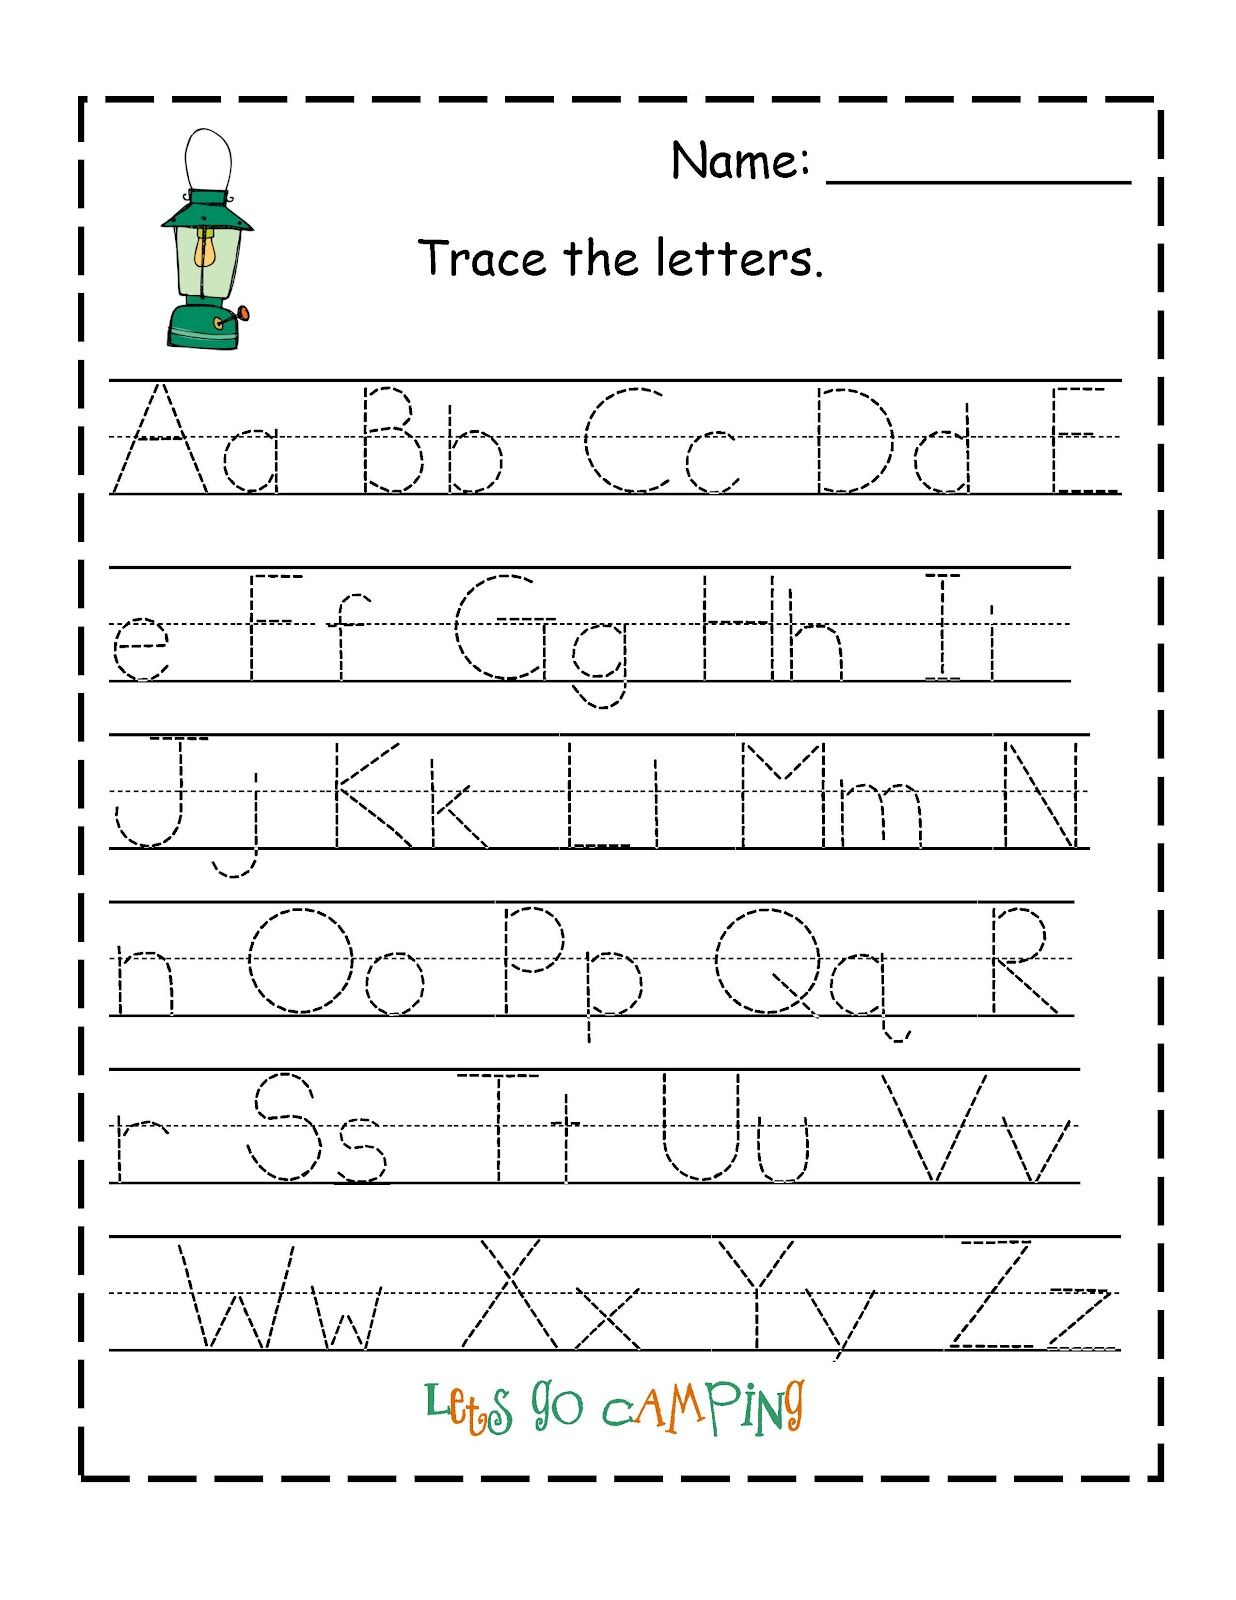 Camping+New+Template+For+A-Z (1236×1600) | Handwriting